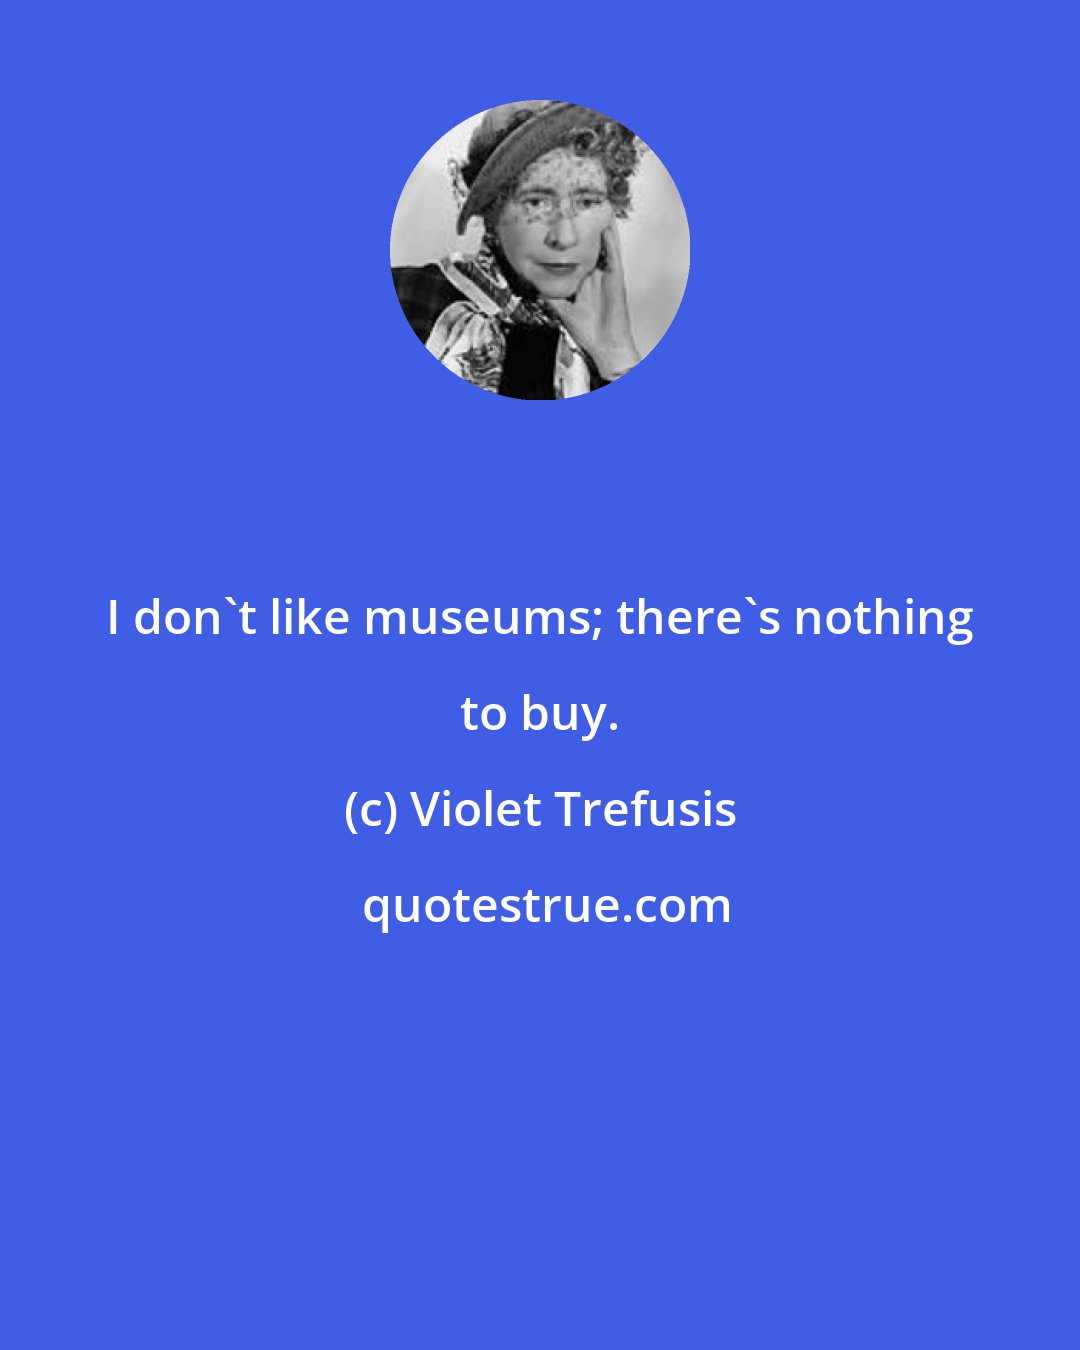 Violet Trefusis: I don't like museums; there's nothing to buy.